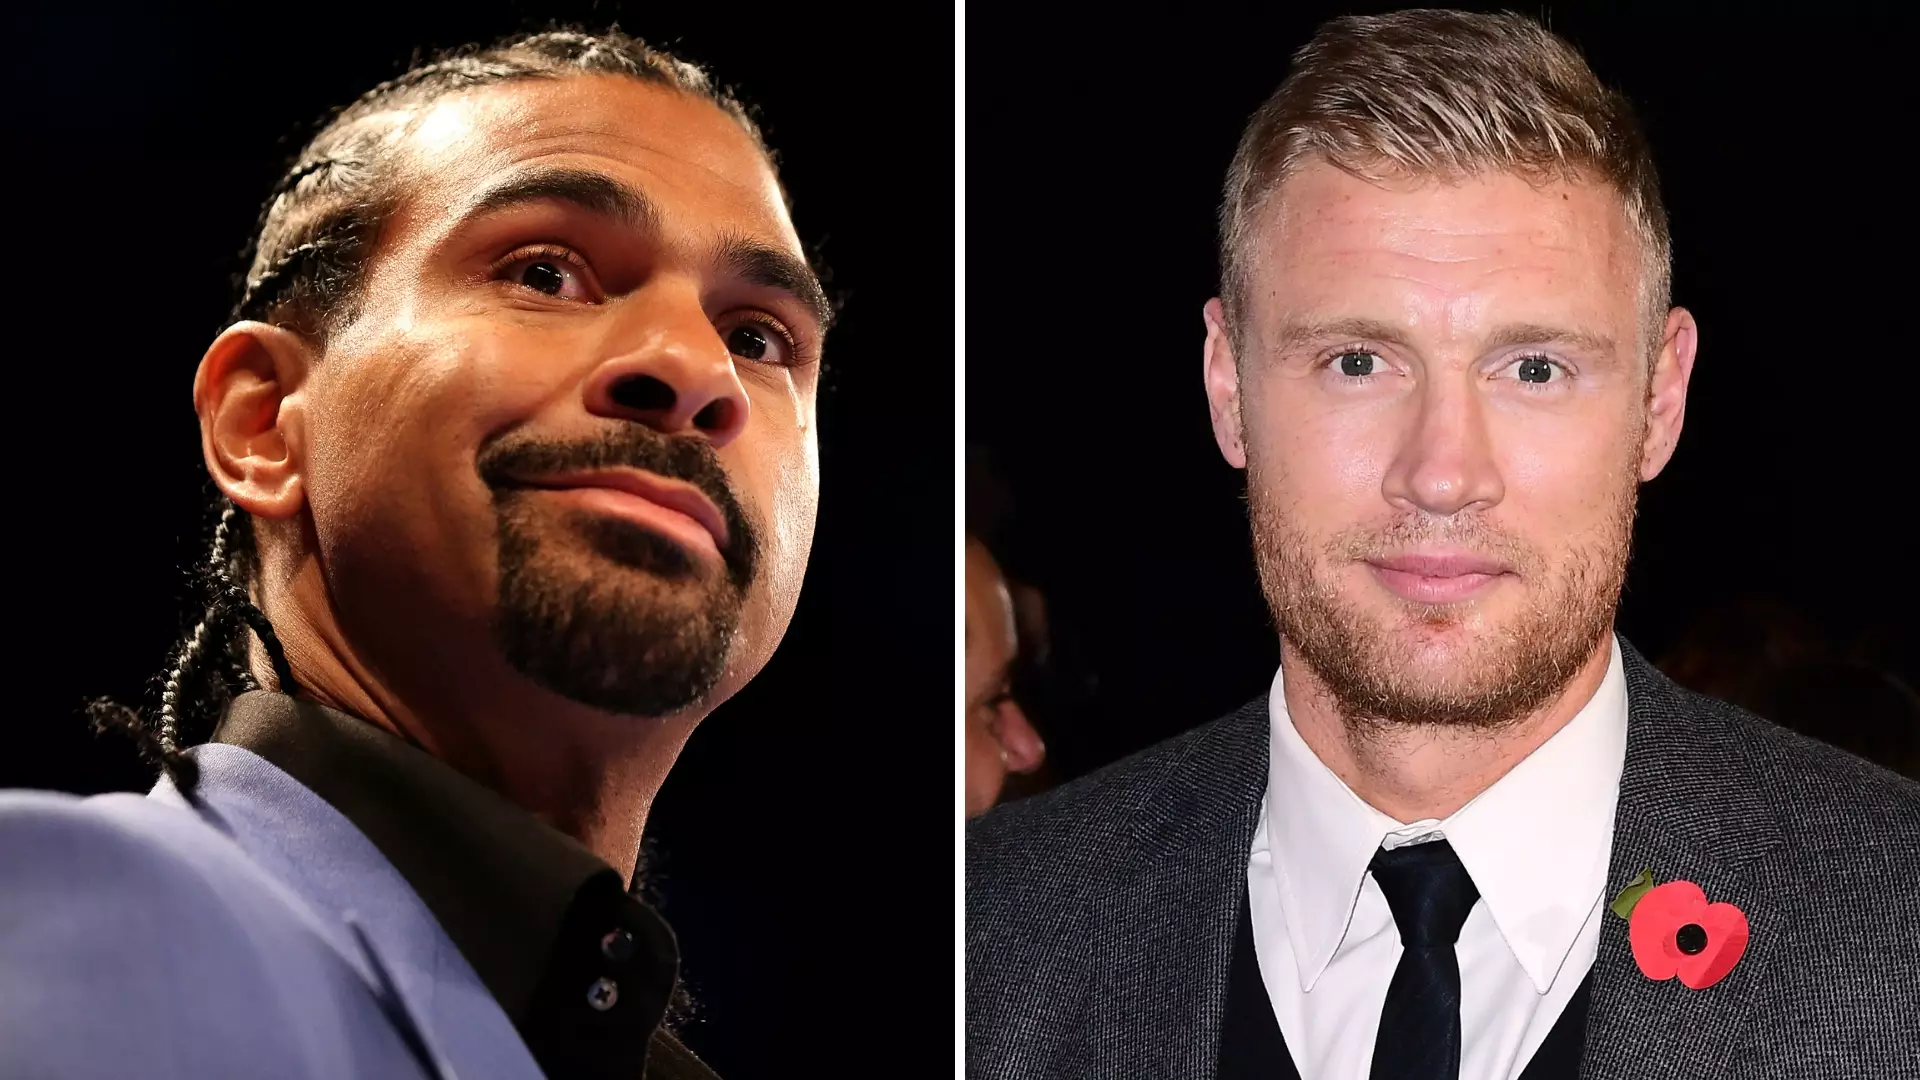 Freddie Flintoff Is Not Happy With David Haye After He 'Beat-Up' Jack Whitehall